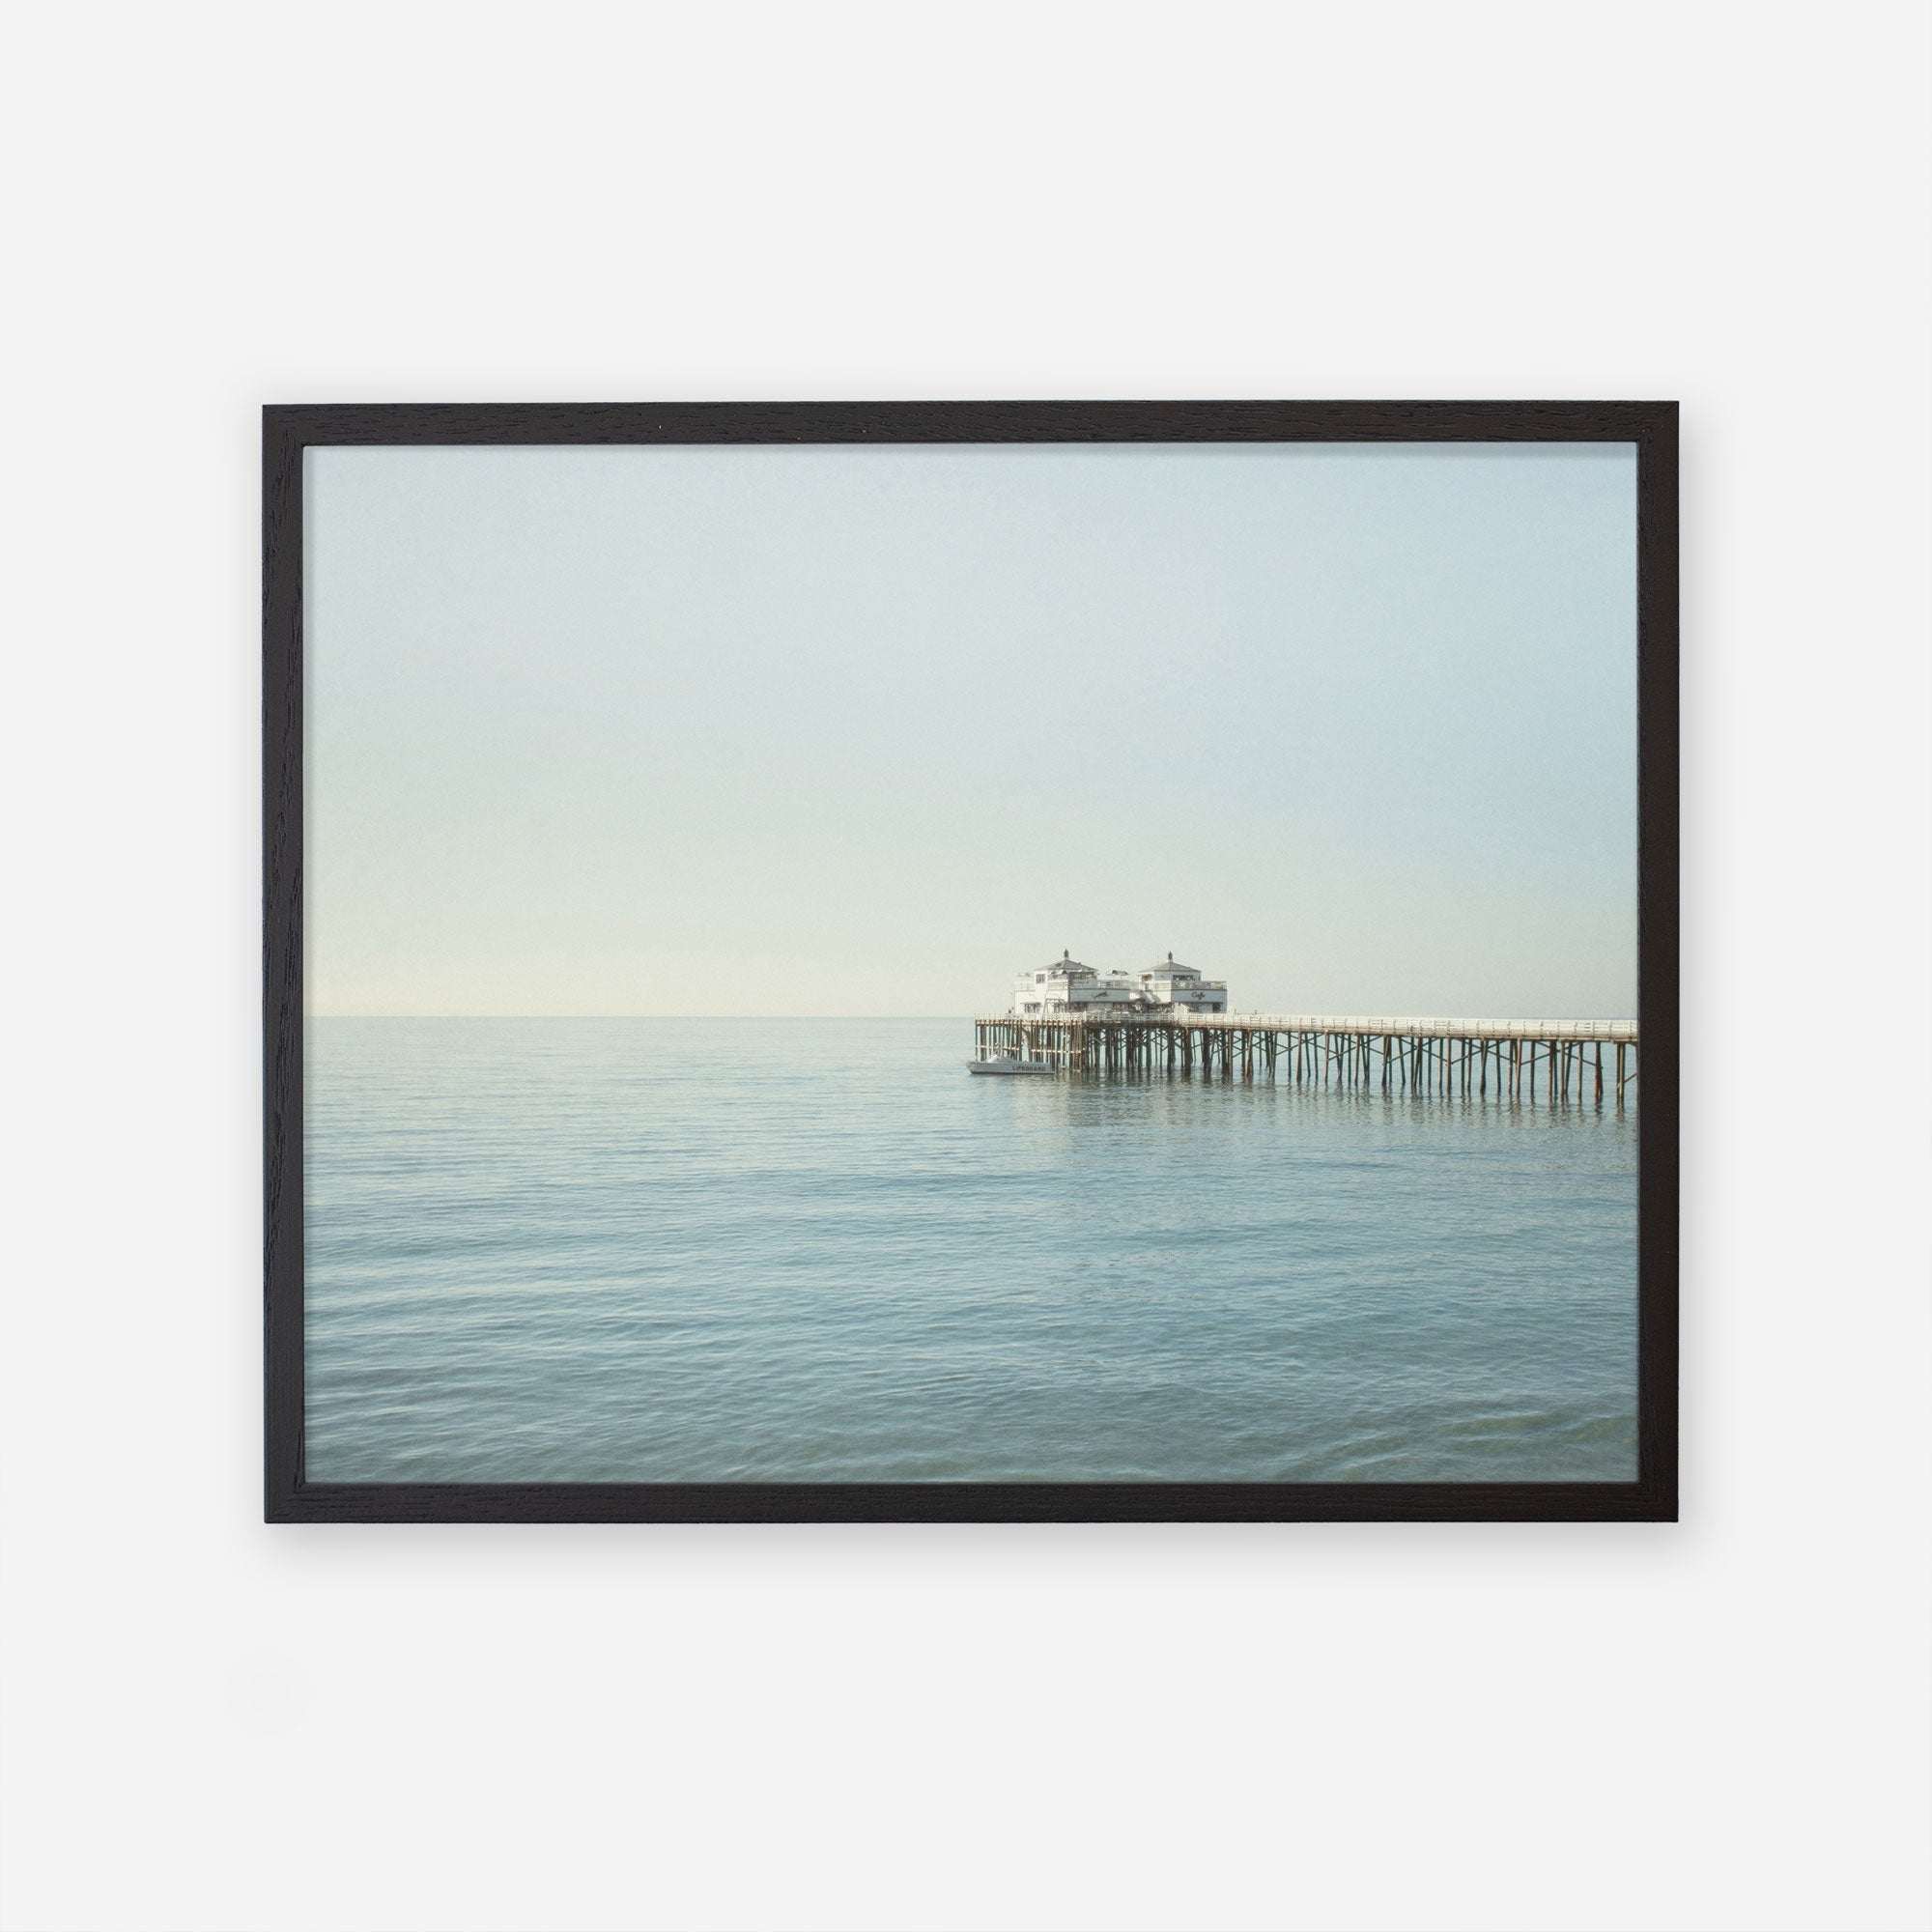 A framed photograph of a tranquil seascape featuring Malibu Pier with a small building extending into the calm ocean under a clear sky, Coastal Print of Malibu Pier in California &#39;All Calm in Malibu&#39; by Offley Green.